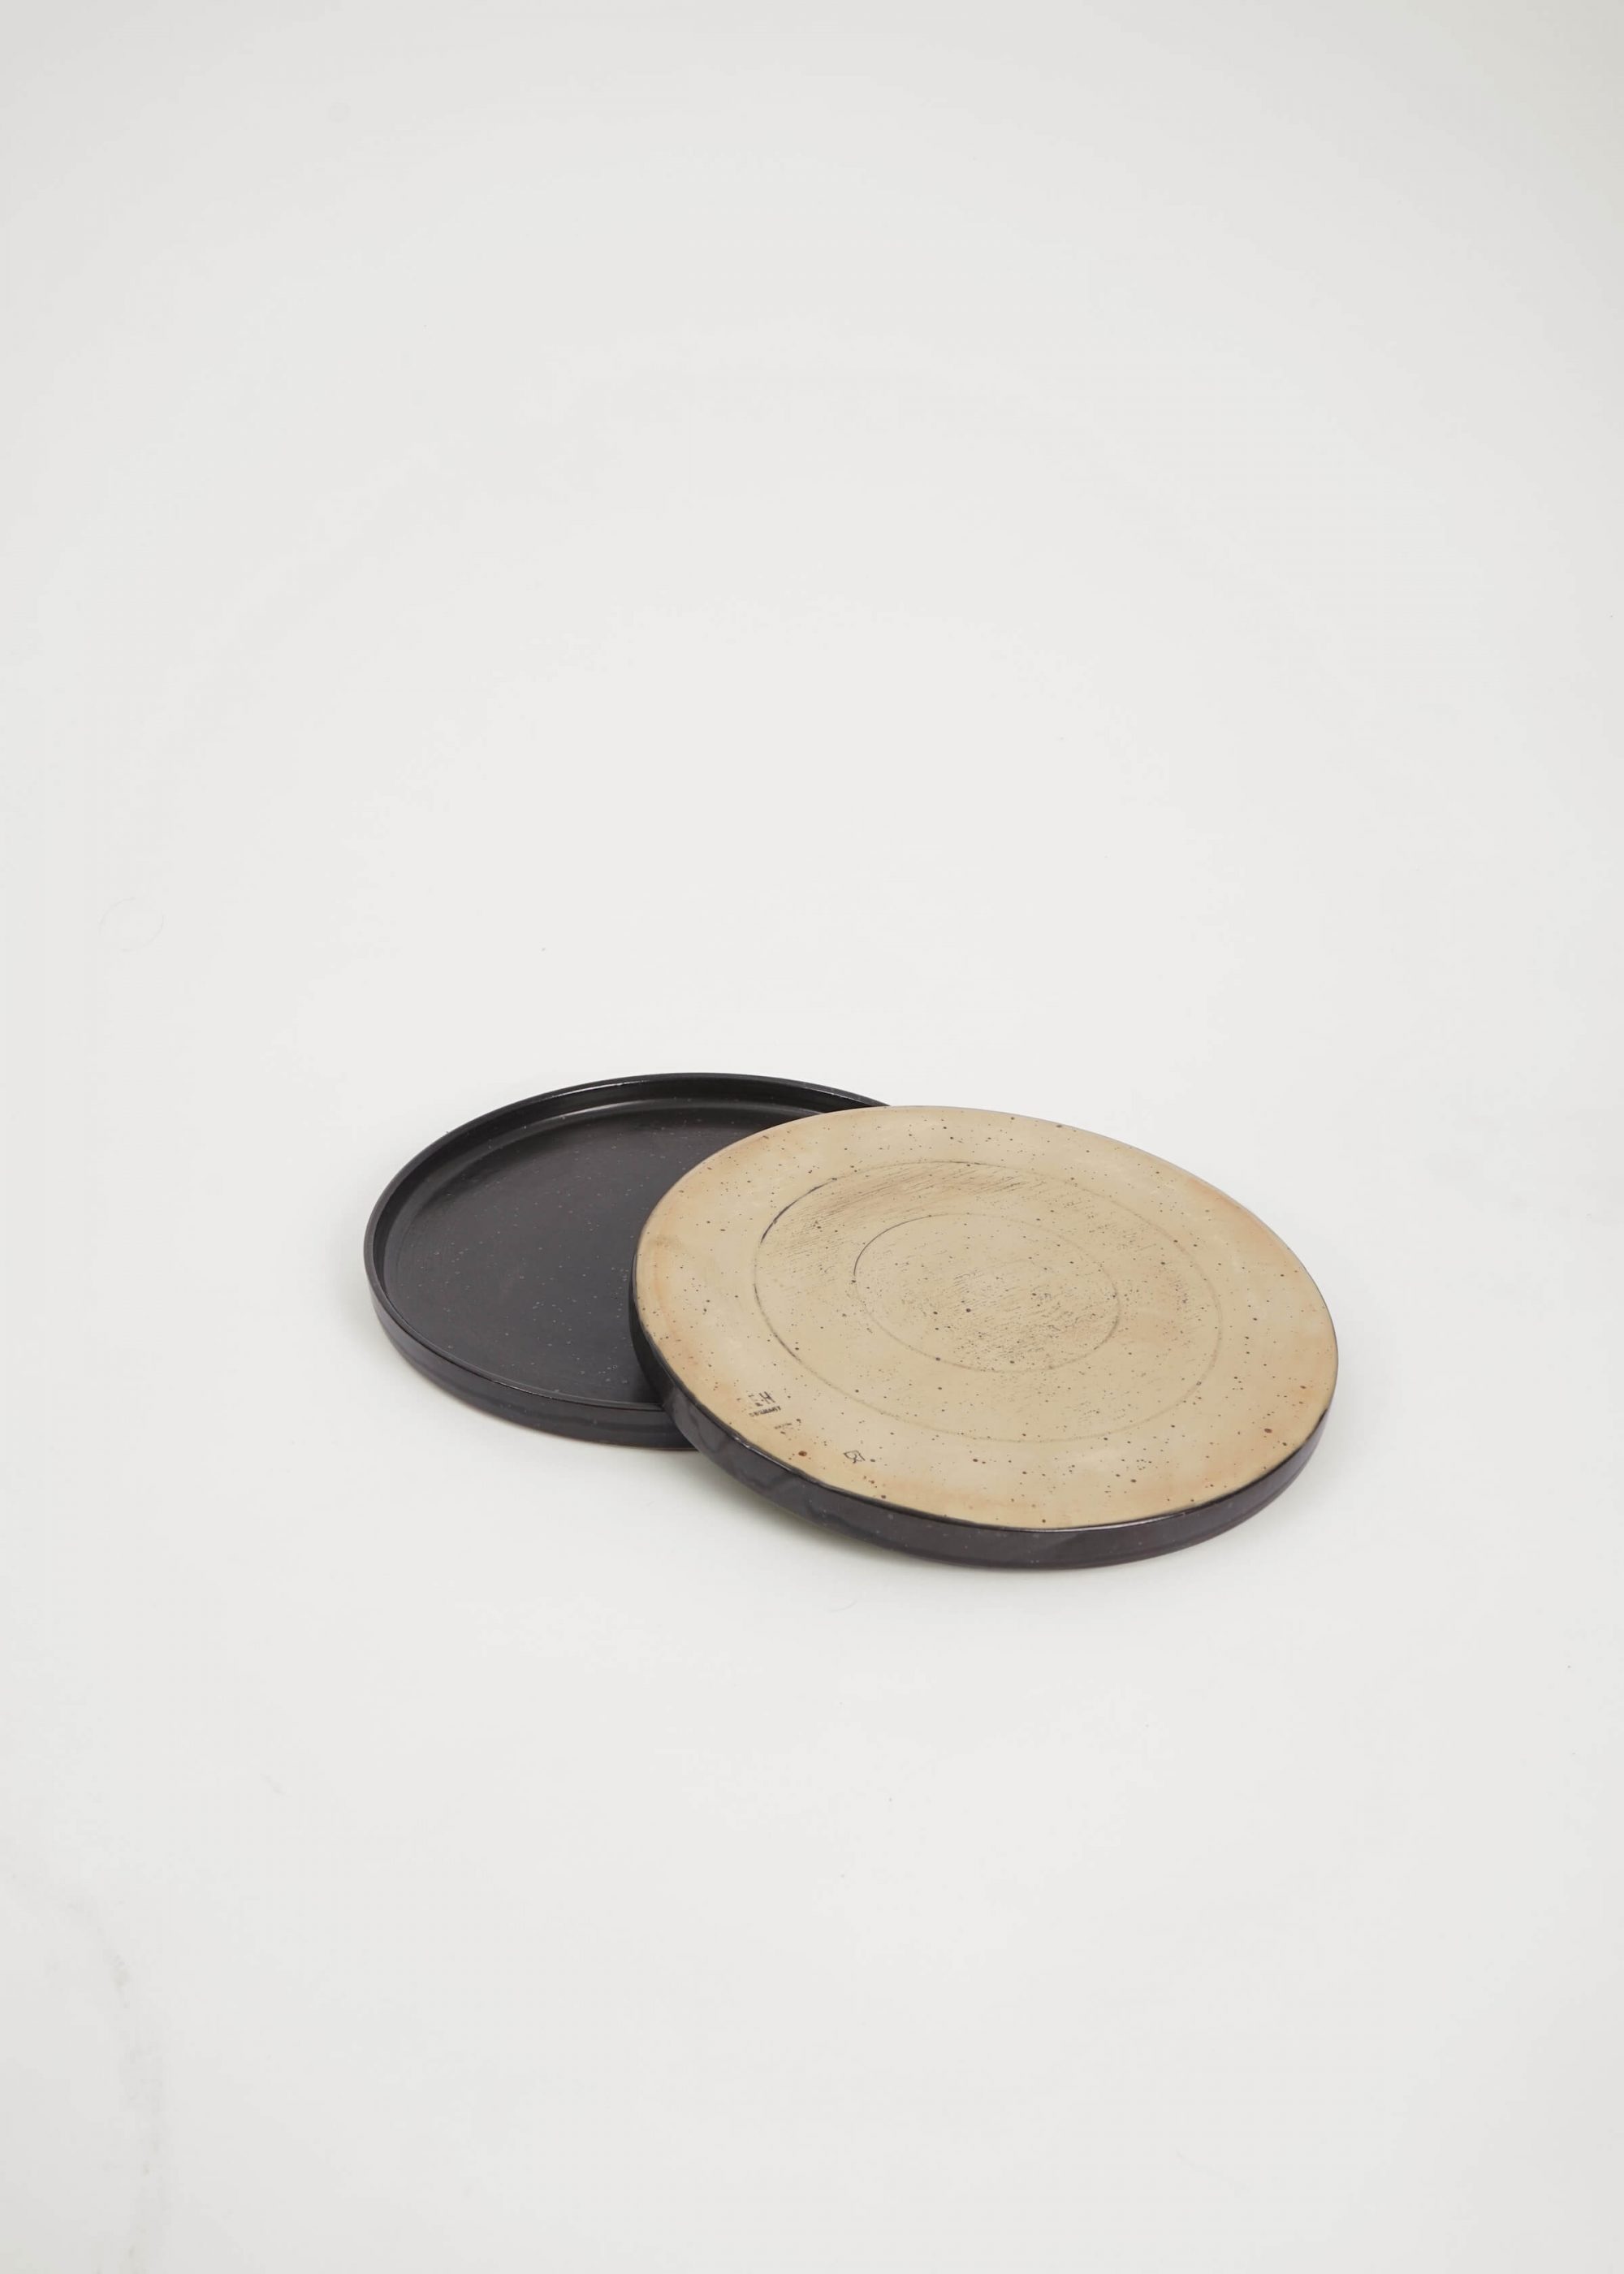 Product image for N° ICC6 High Rim Plate